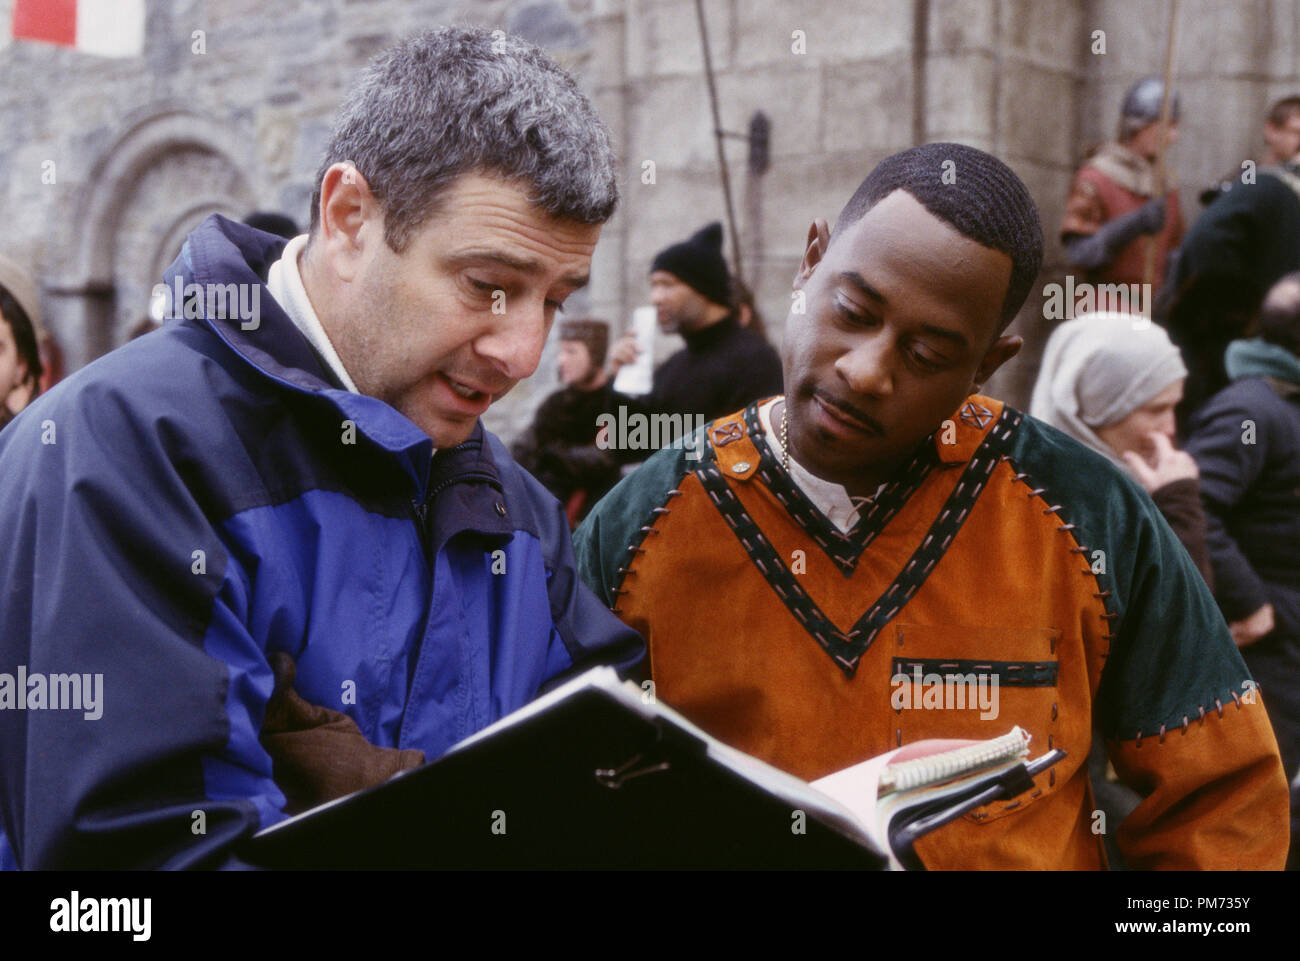 Film Still / Publicity Still from 'Black Knight' Director Gil Junger, Martin Lawrence © 2001 20th Century Fox Photo credit: Nicola Goode File Reference # 308471362THA  For Editorial Use Only -  All Rights Reserved Stock Photo